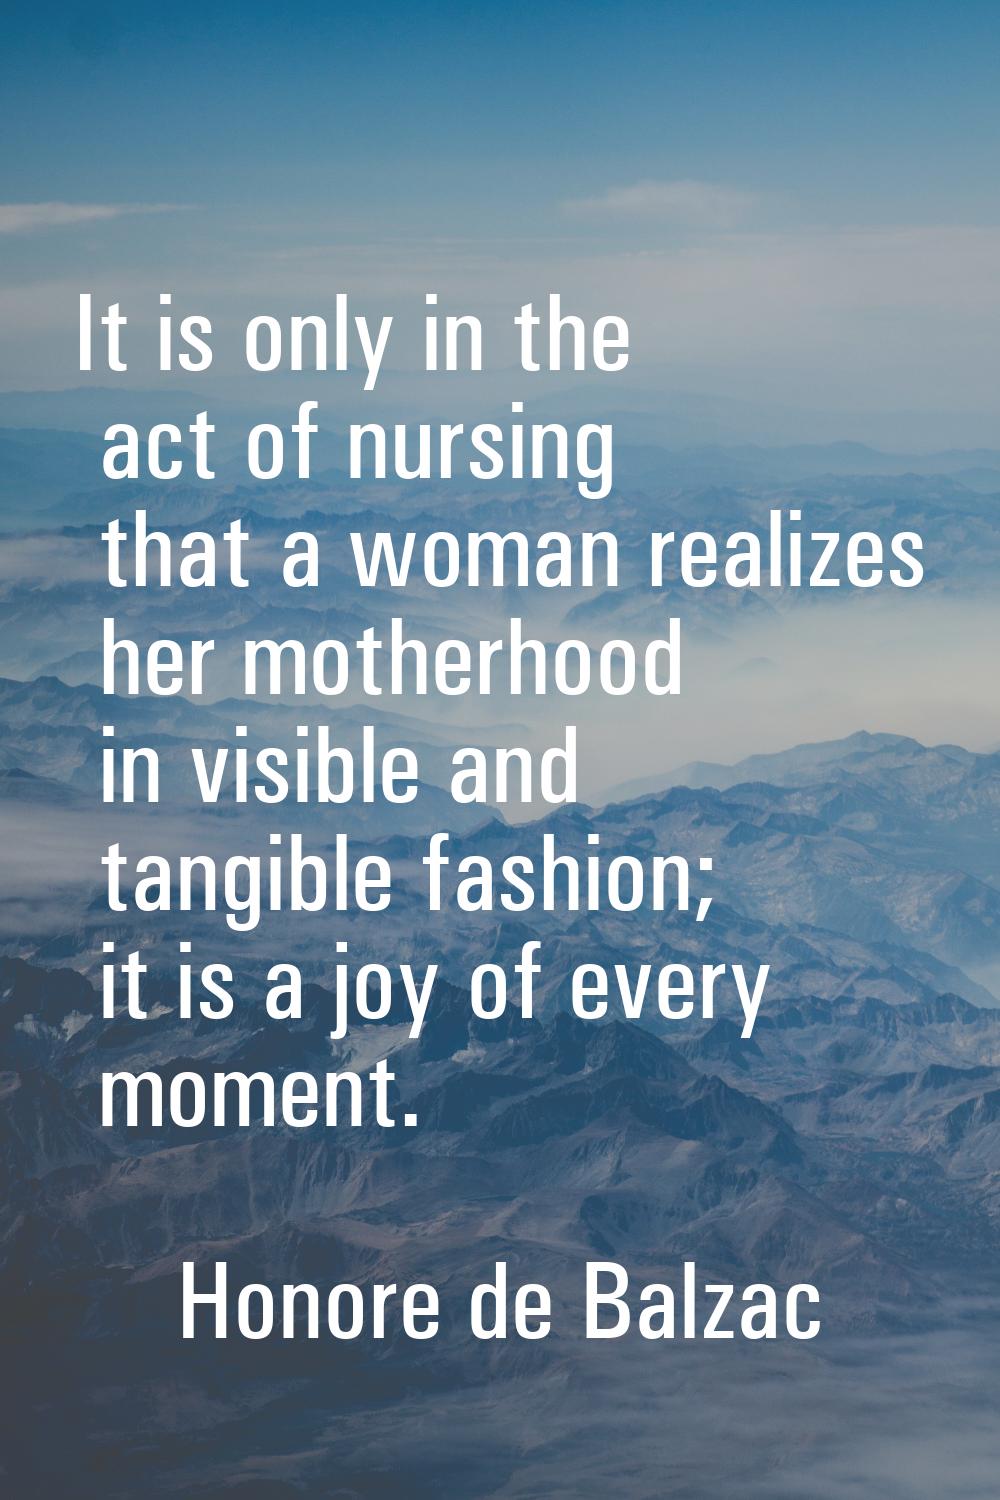 It is only in the act of nursing that a woman realizes her motherhood in visible and tangible fashi